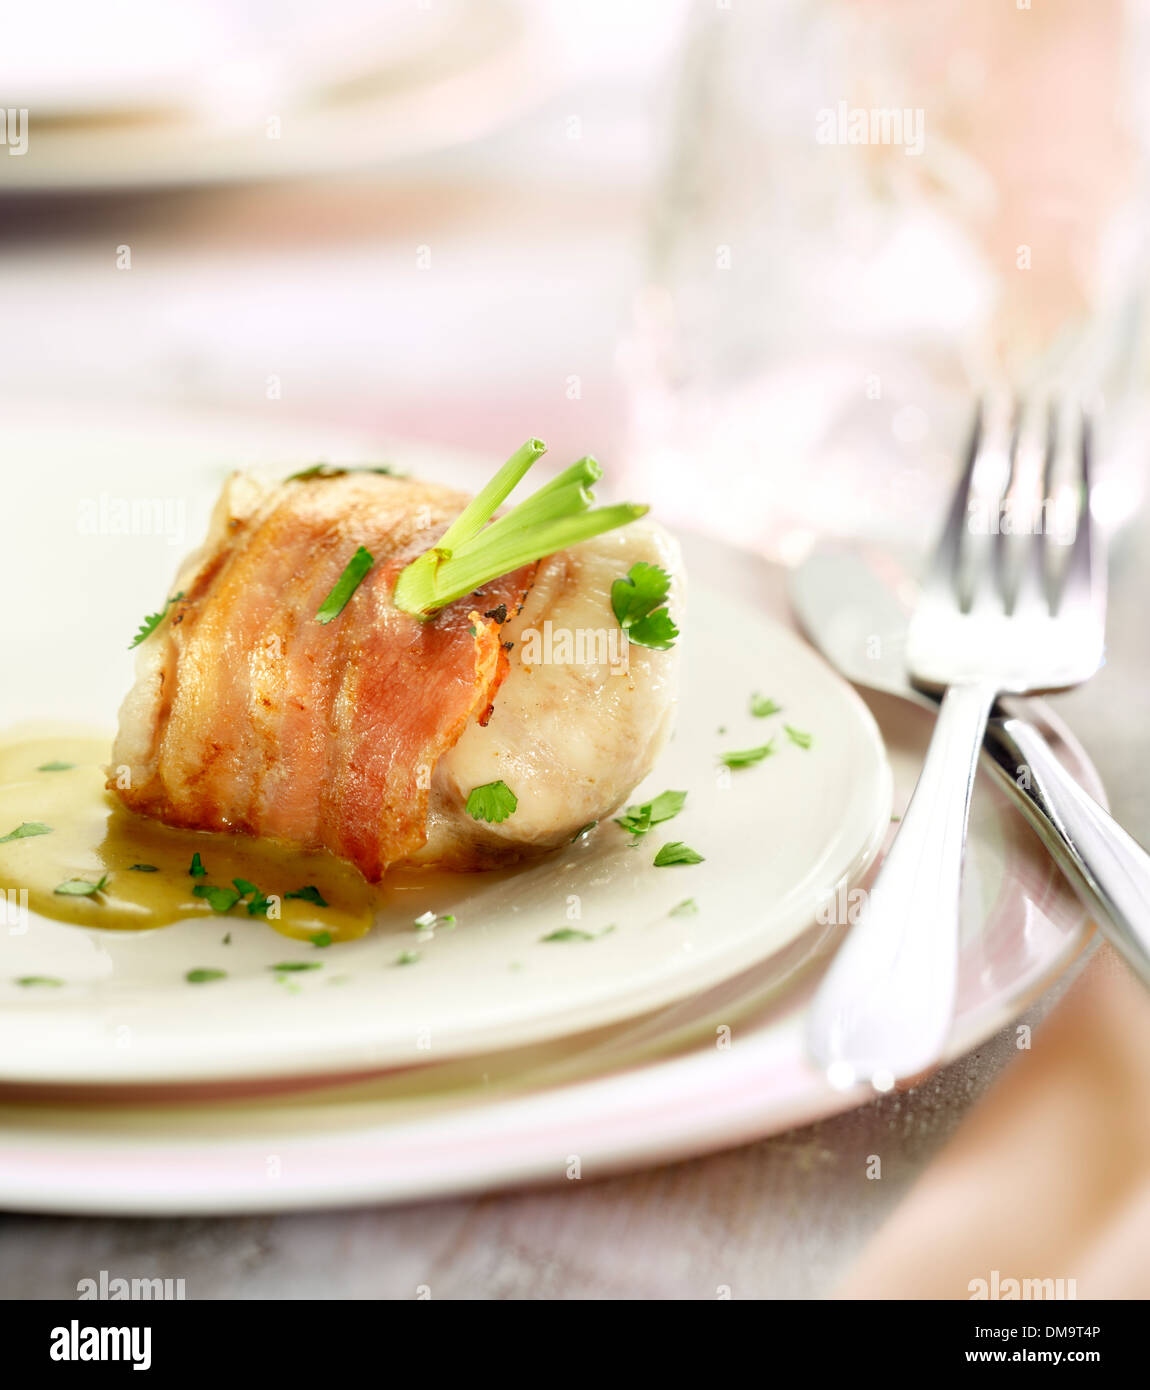 monk fish fillet wrapped in bacon served with a sauce and a garnish of parsley, on a white plate brightly lit Stock Photo